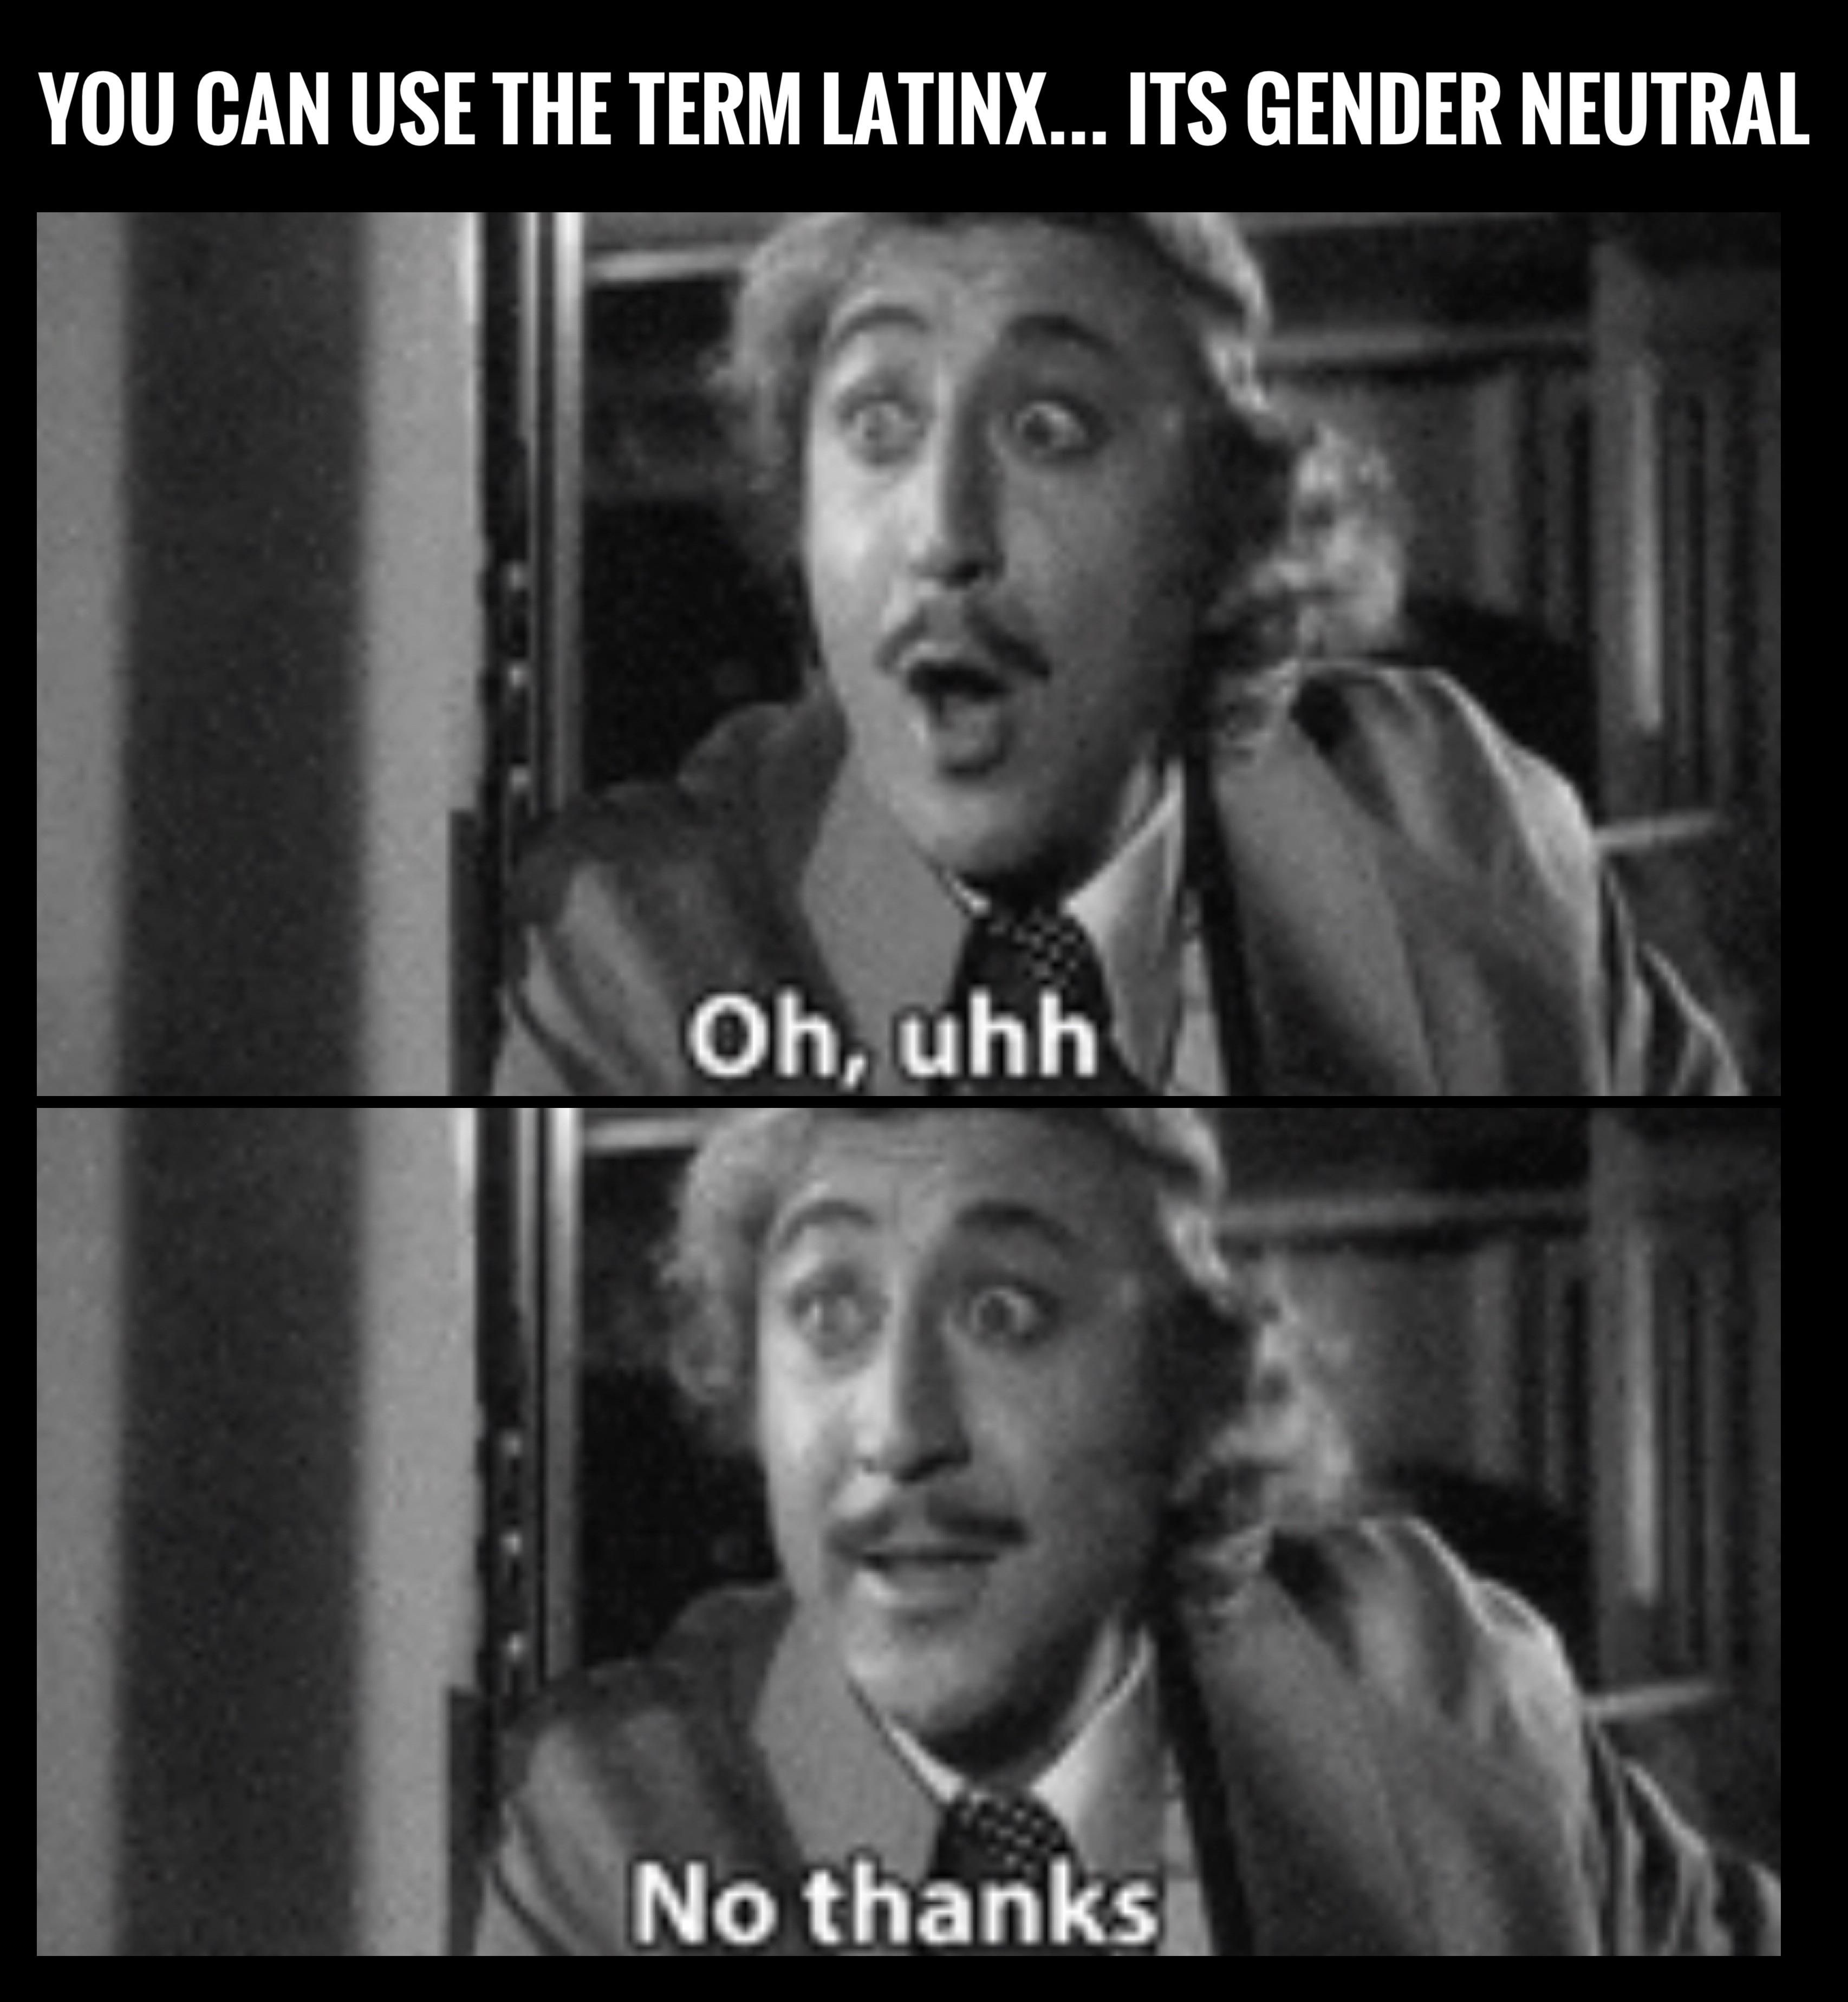 Sincerely, every Latino/Latina on earth